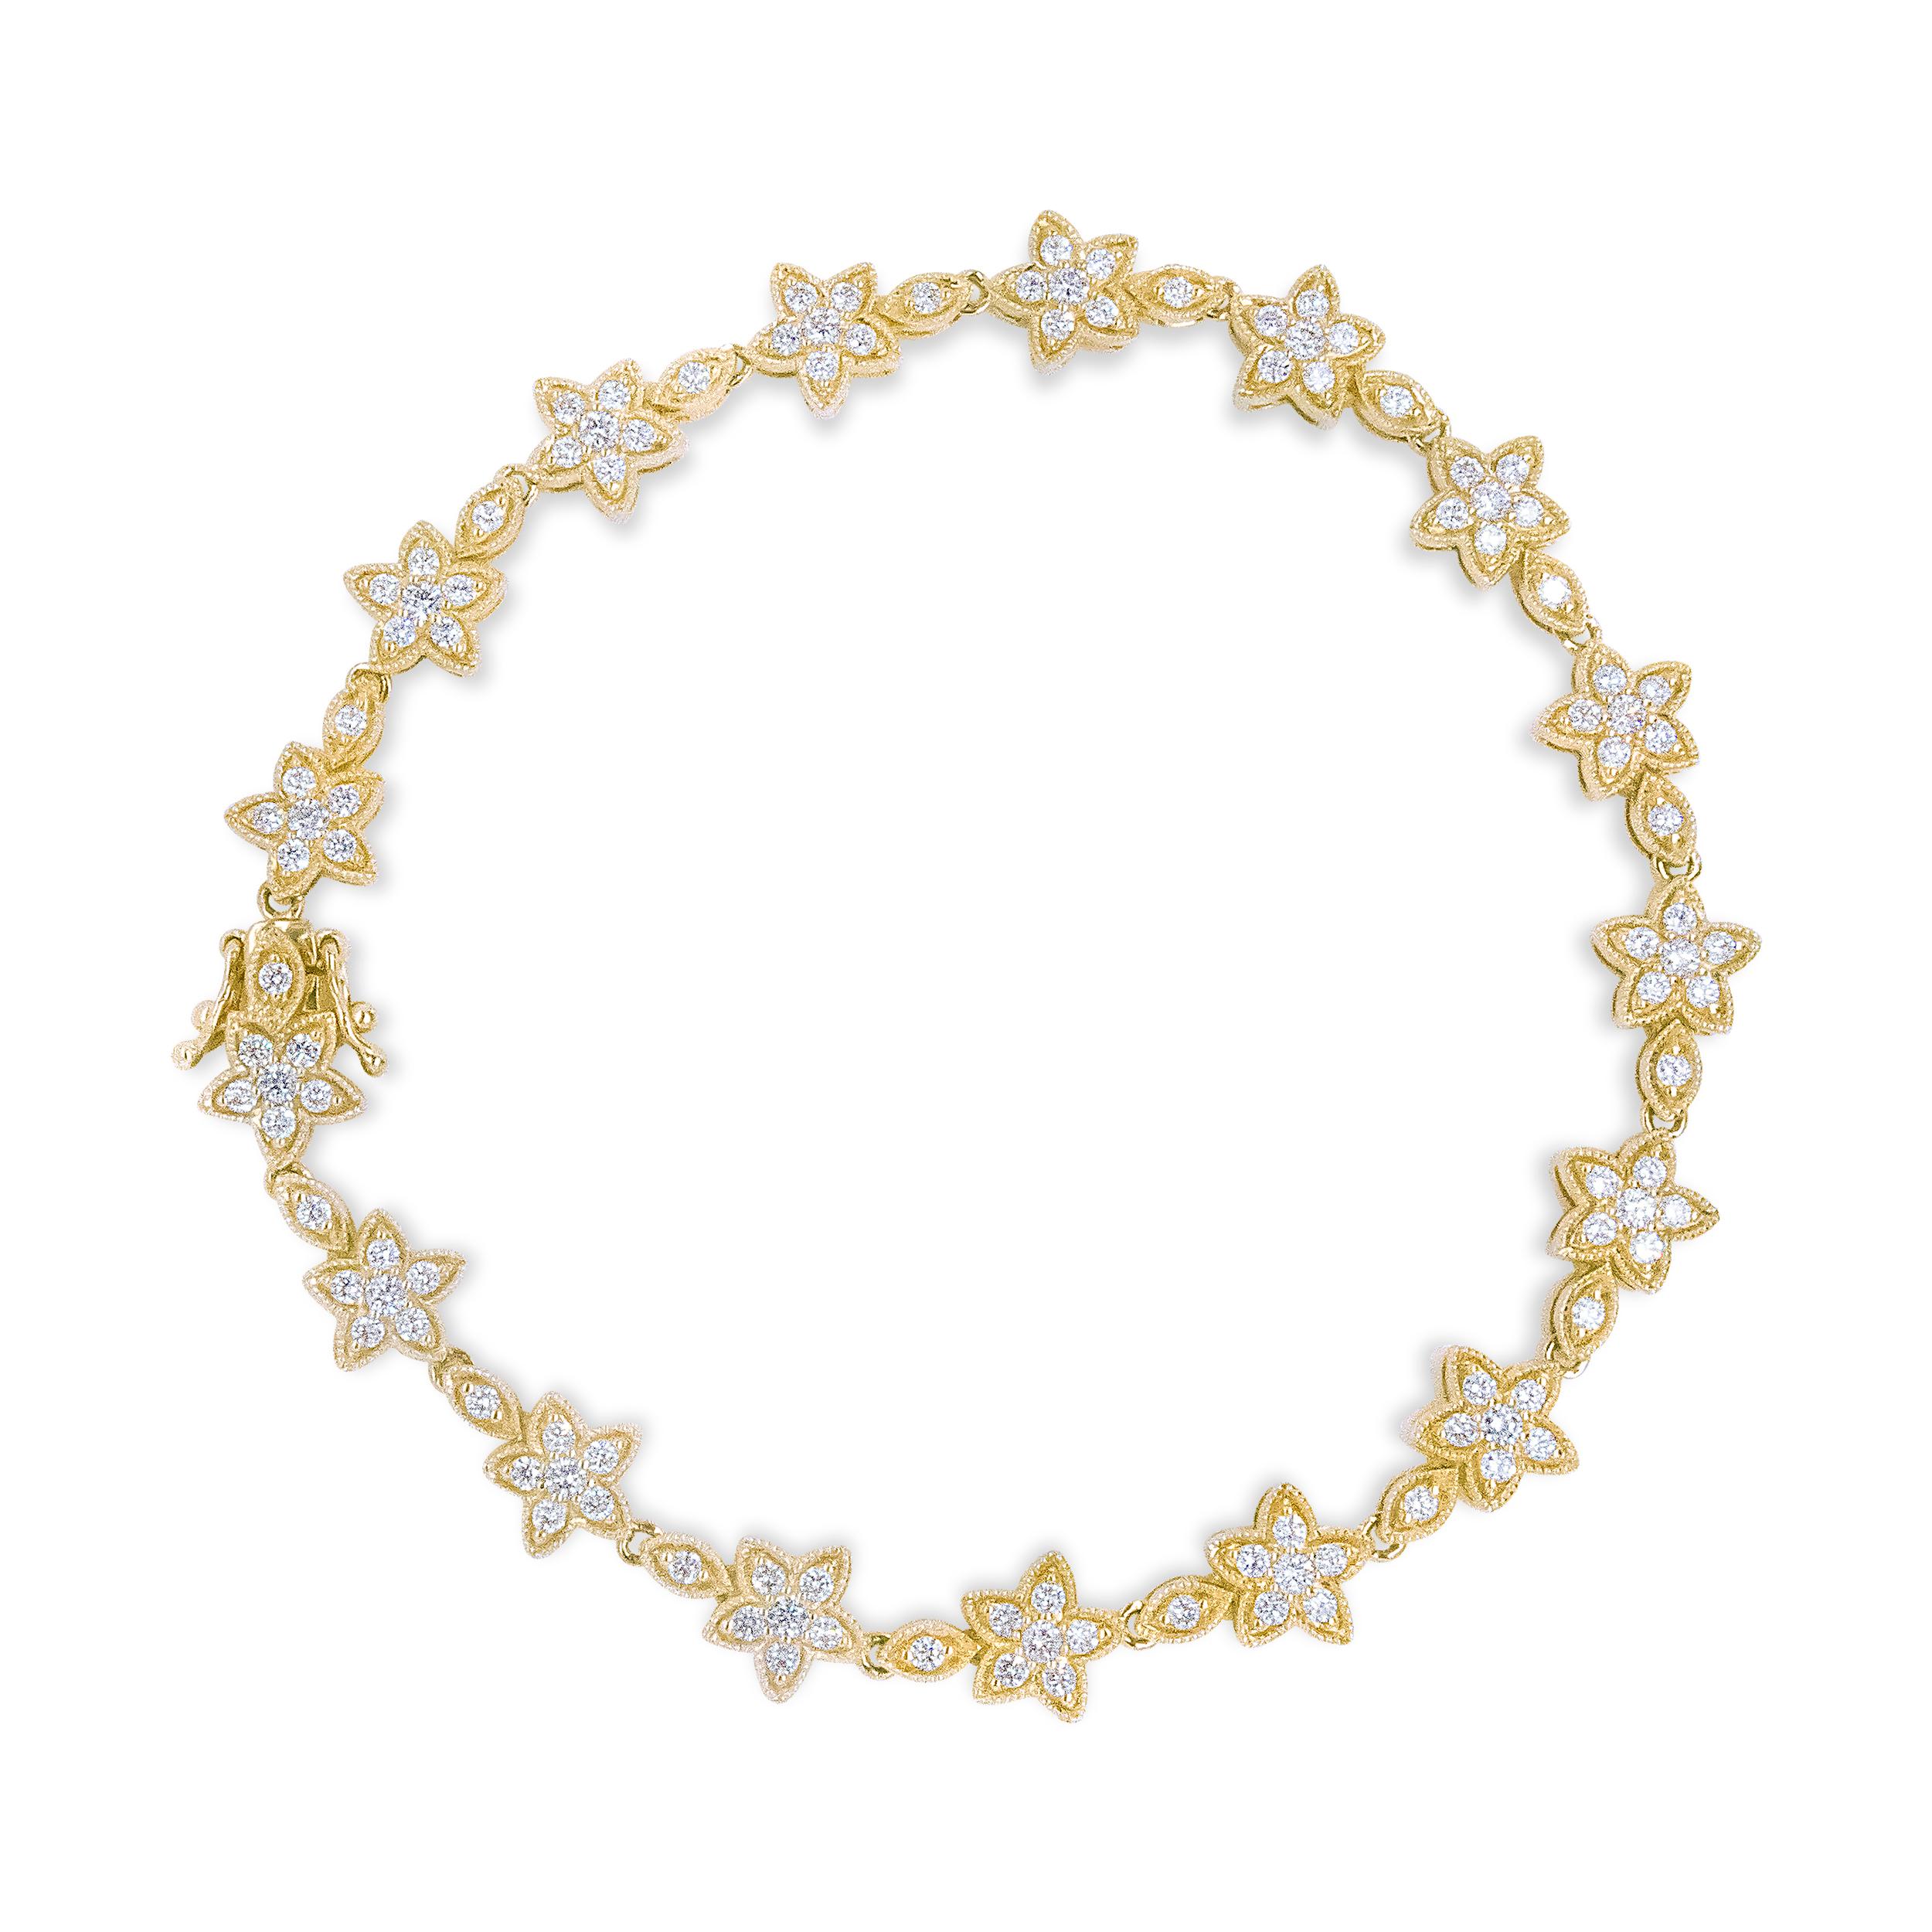 A Mother Nature inspired piece, this floral link bracelet pairs a star-shaped silhouette with the beauty of genuine 14k yellow gold and glimmering white diamonds. Slip this beauty on your wrist and experience the luxury of a total 1 1/5 cttw